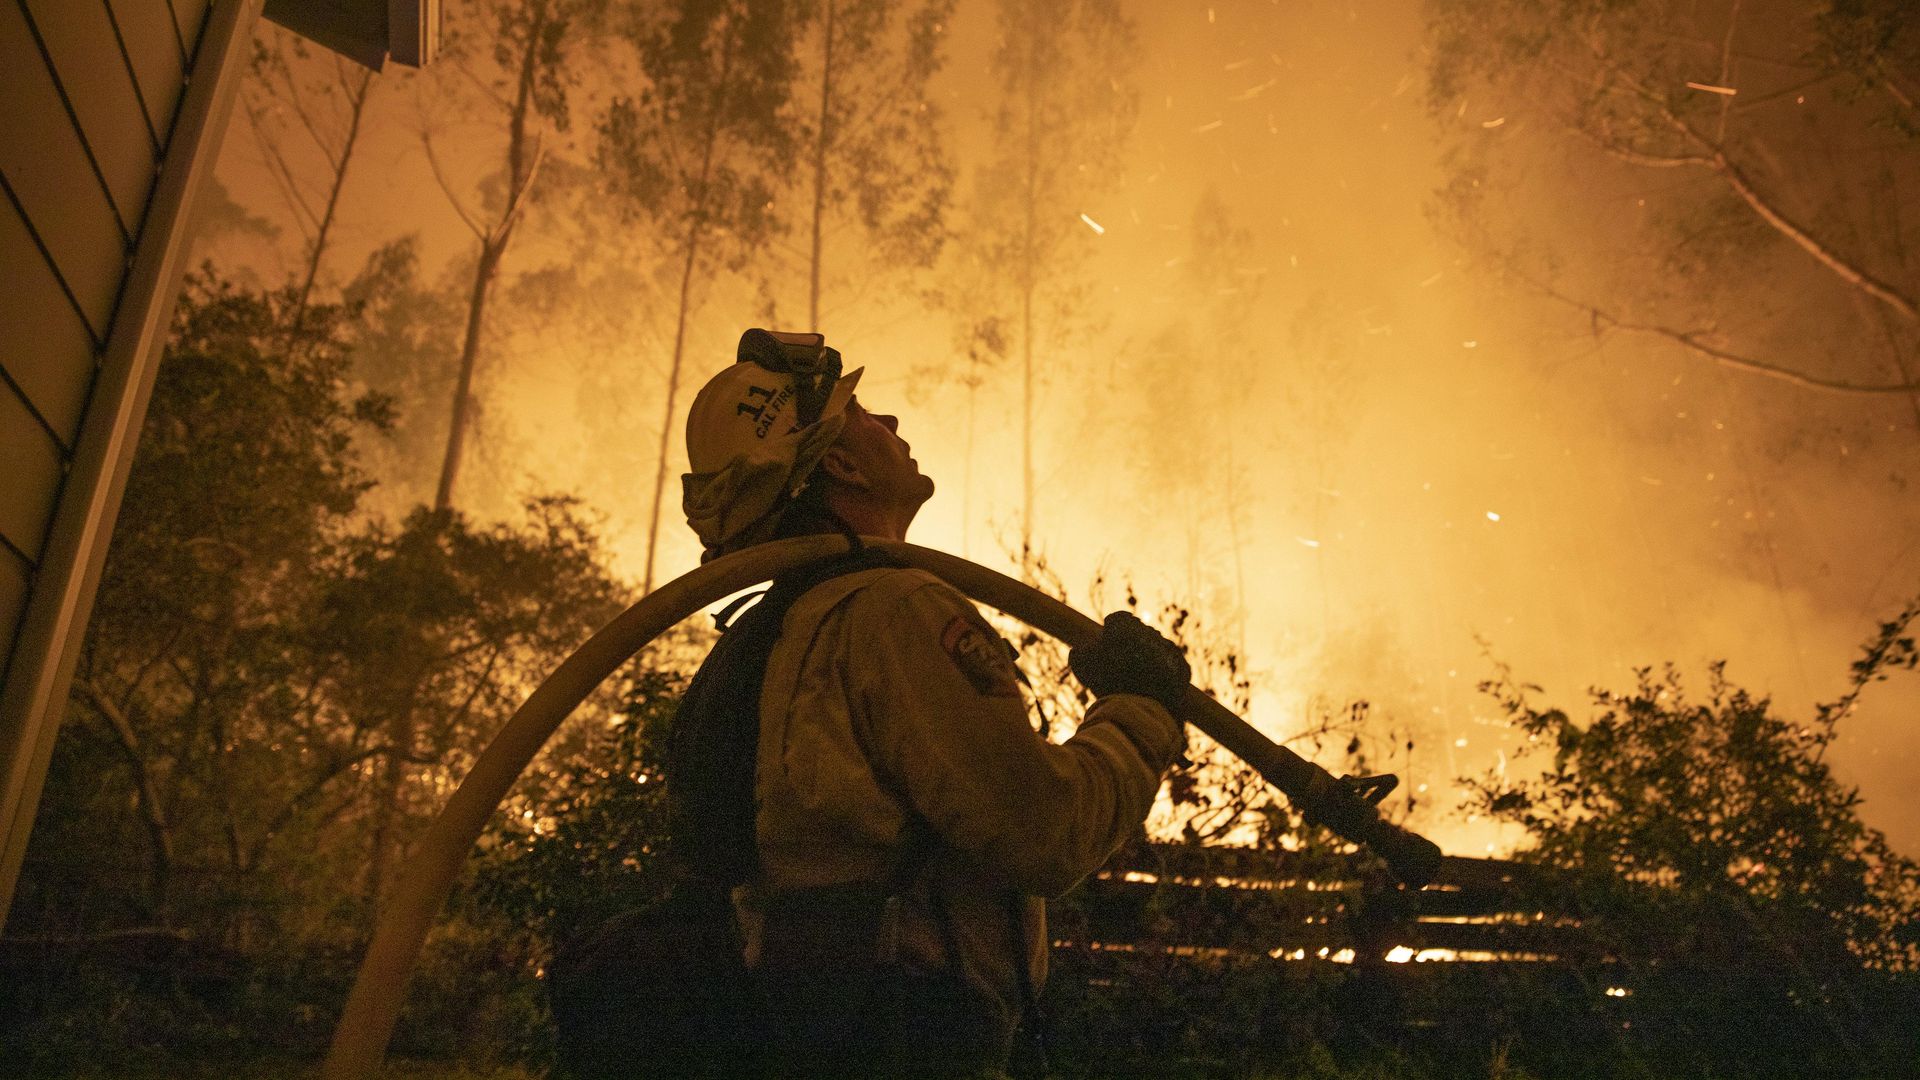  A firefighter tries to put out the wildfire on August 19, 2020 in San Mateo, California.